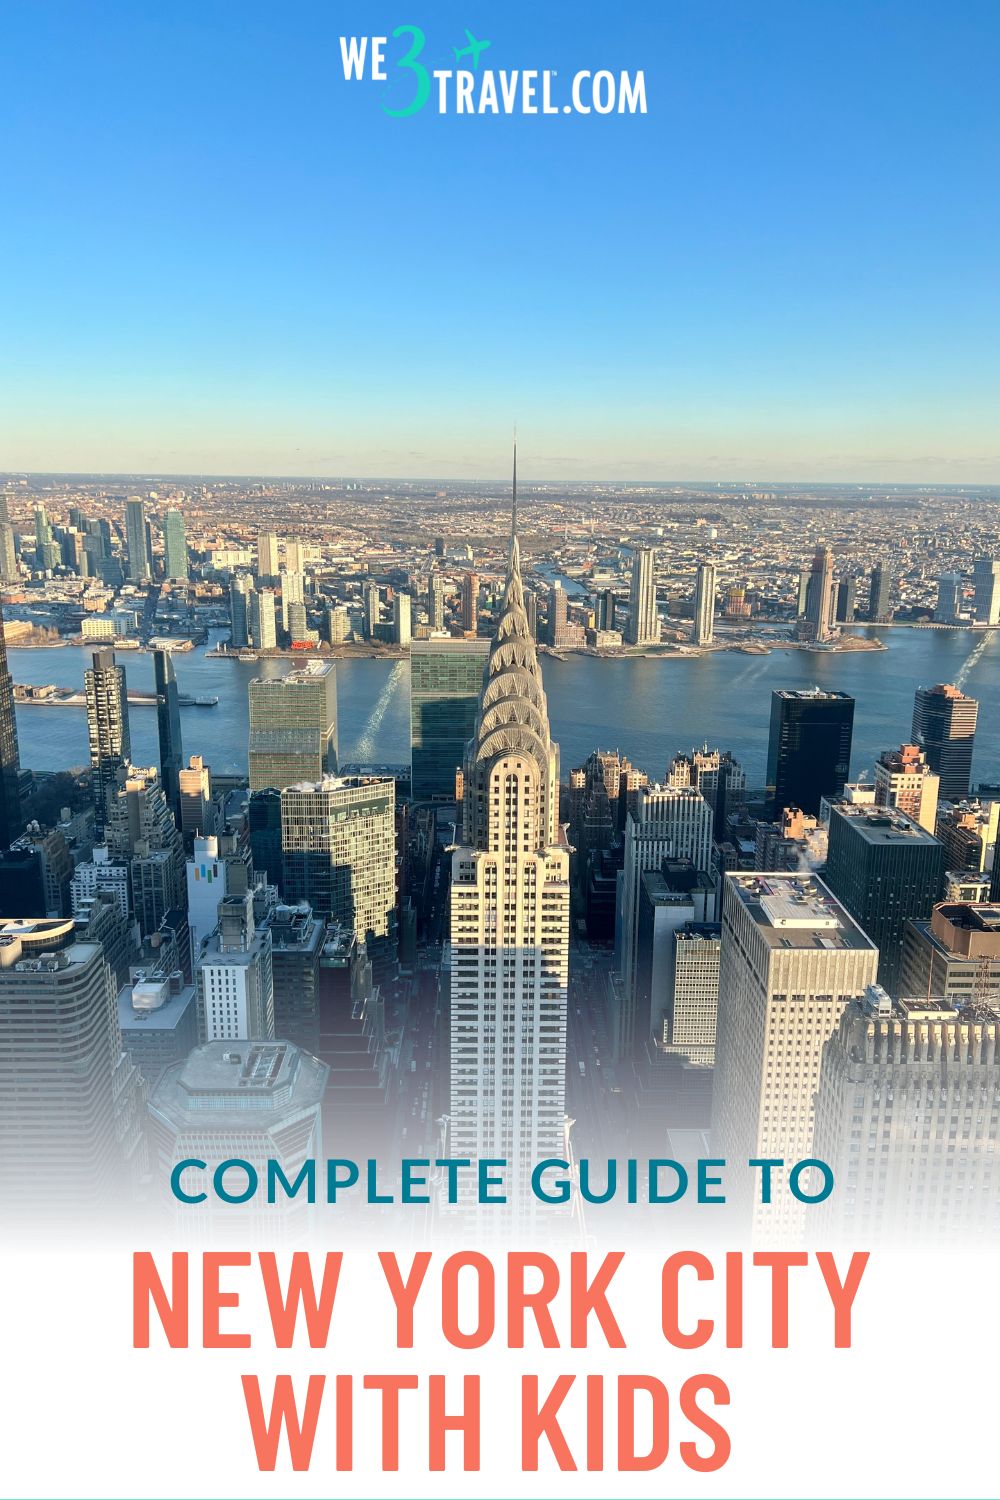 Planning a visit to New York City with kids is overwhelming but in this complete guide to NYC with kids, I'll tell you what to do, where to stay, where to eat, and how to get around with children, tweens, and teens.